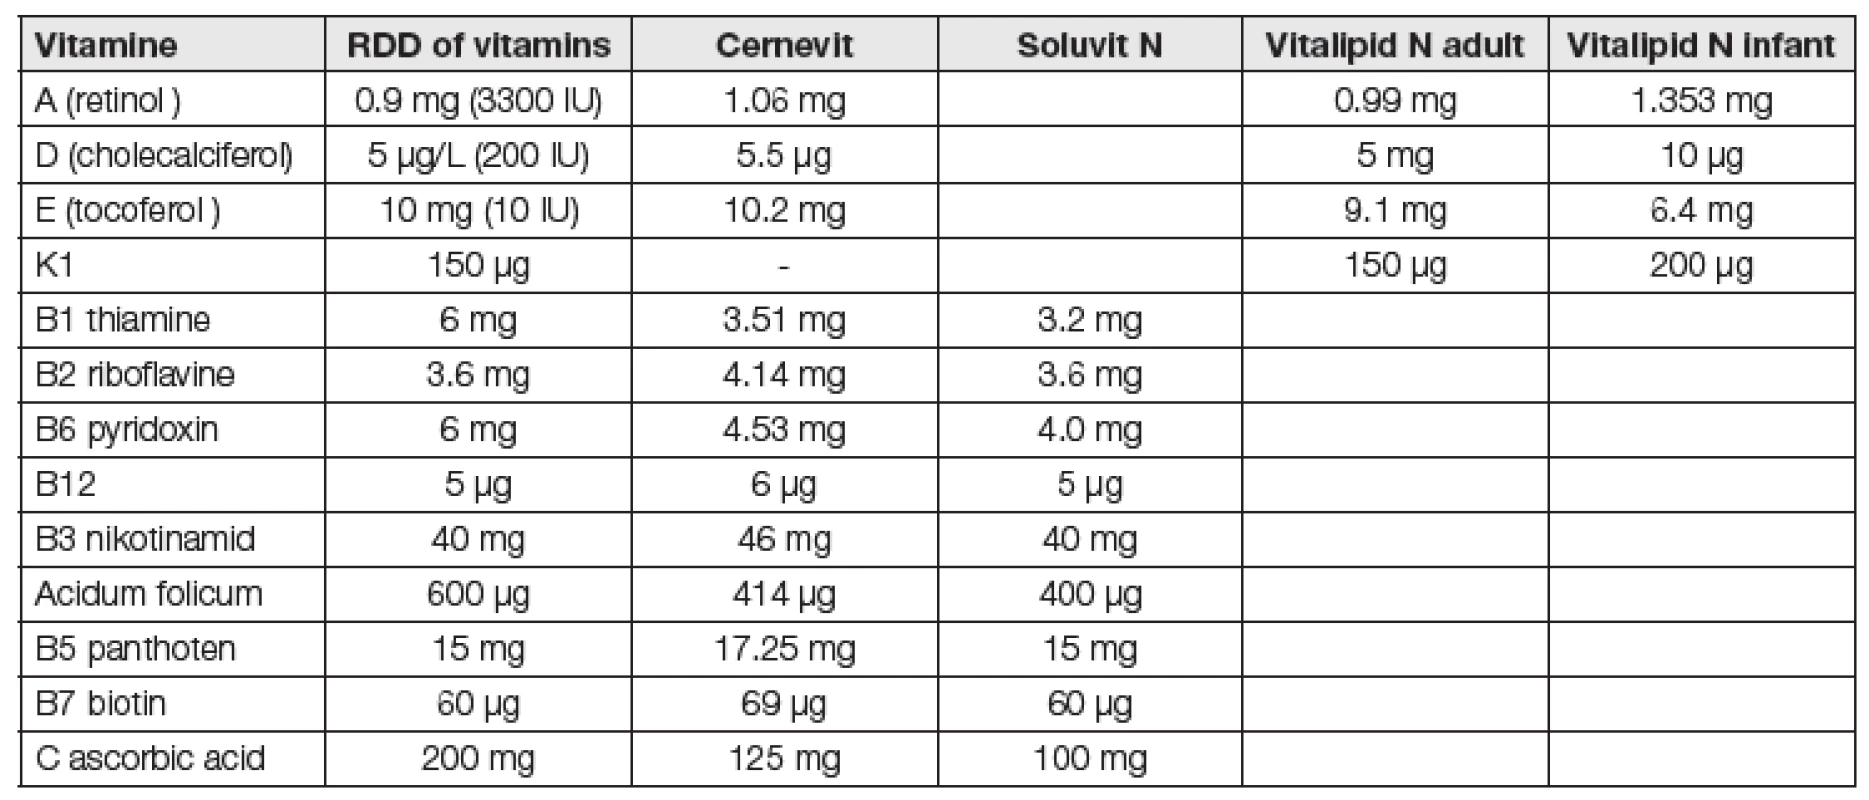 Recomended doses per day (RDD) of vitamines for parenteral use (ASPEN and ESPEN 2009 and supplement 2013) and contains of vitamins in multivitamins medicaments.